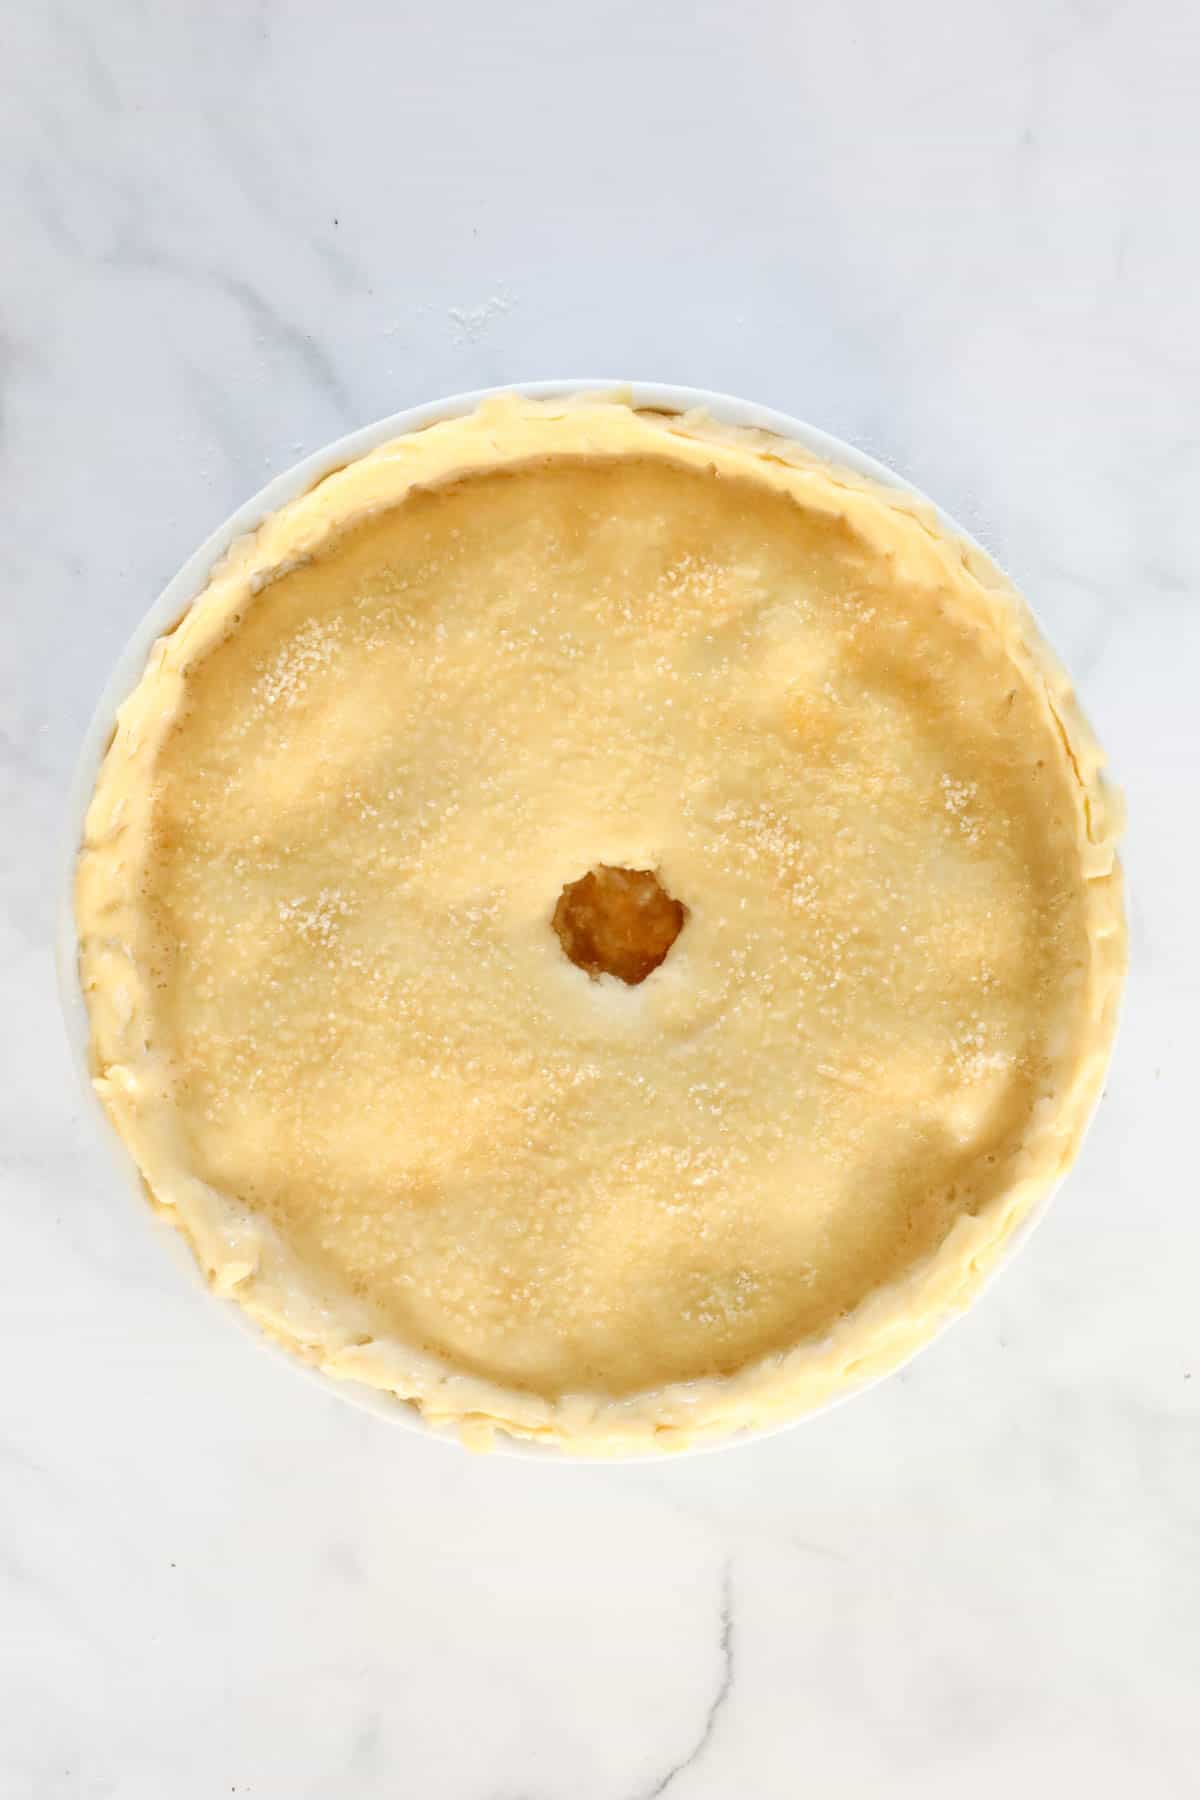 Pastry placed on top of the pie with a hole cut out of the centre.